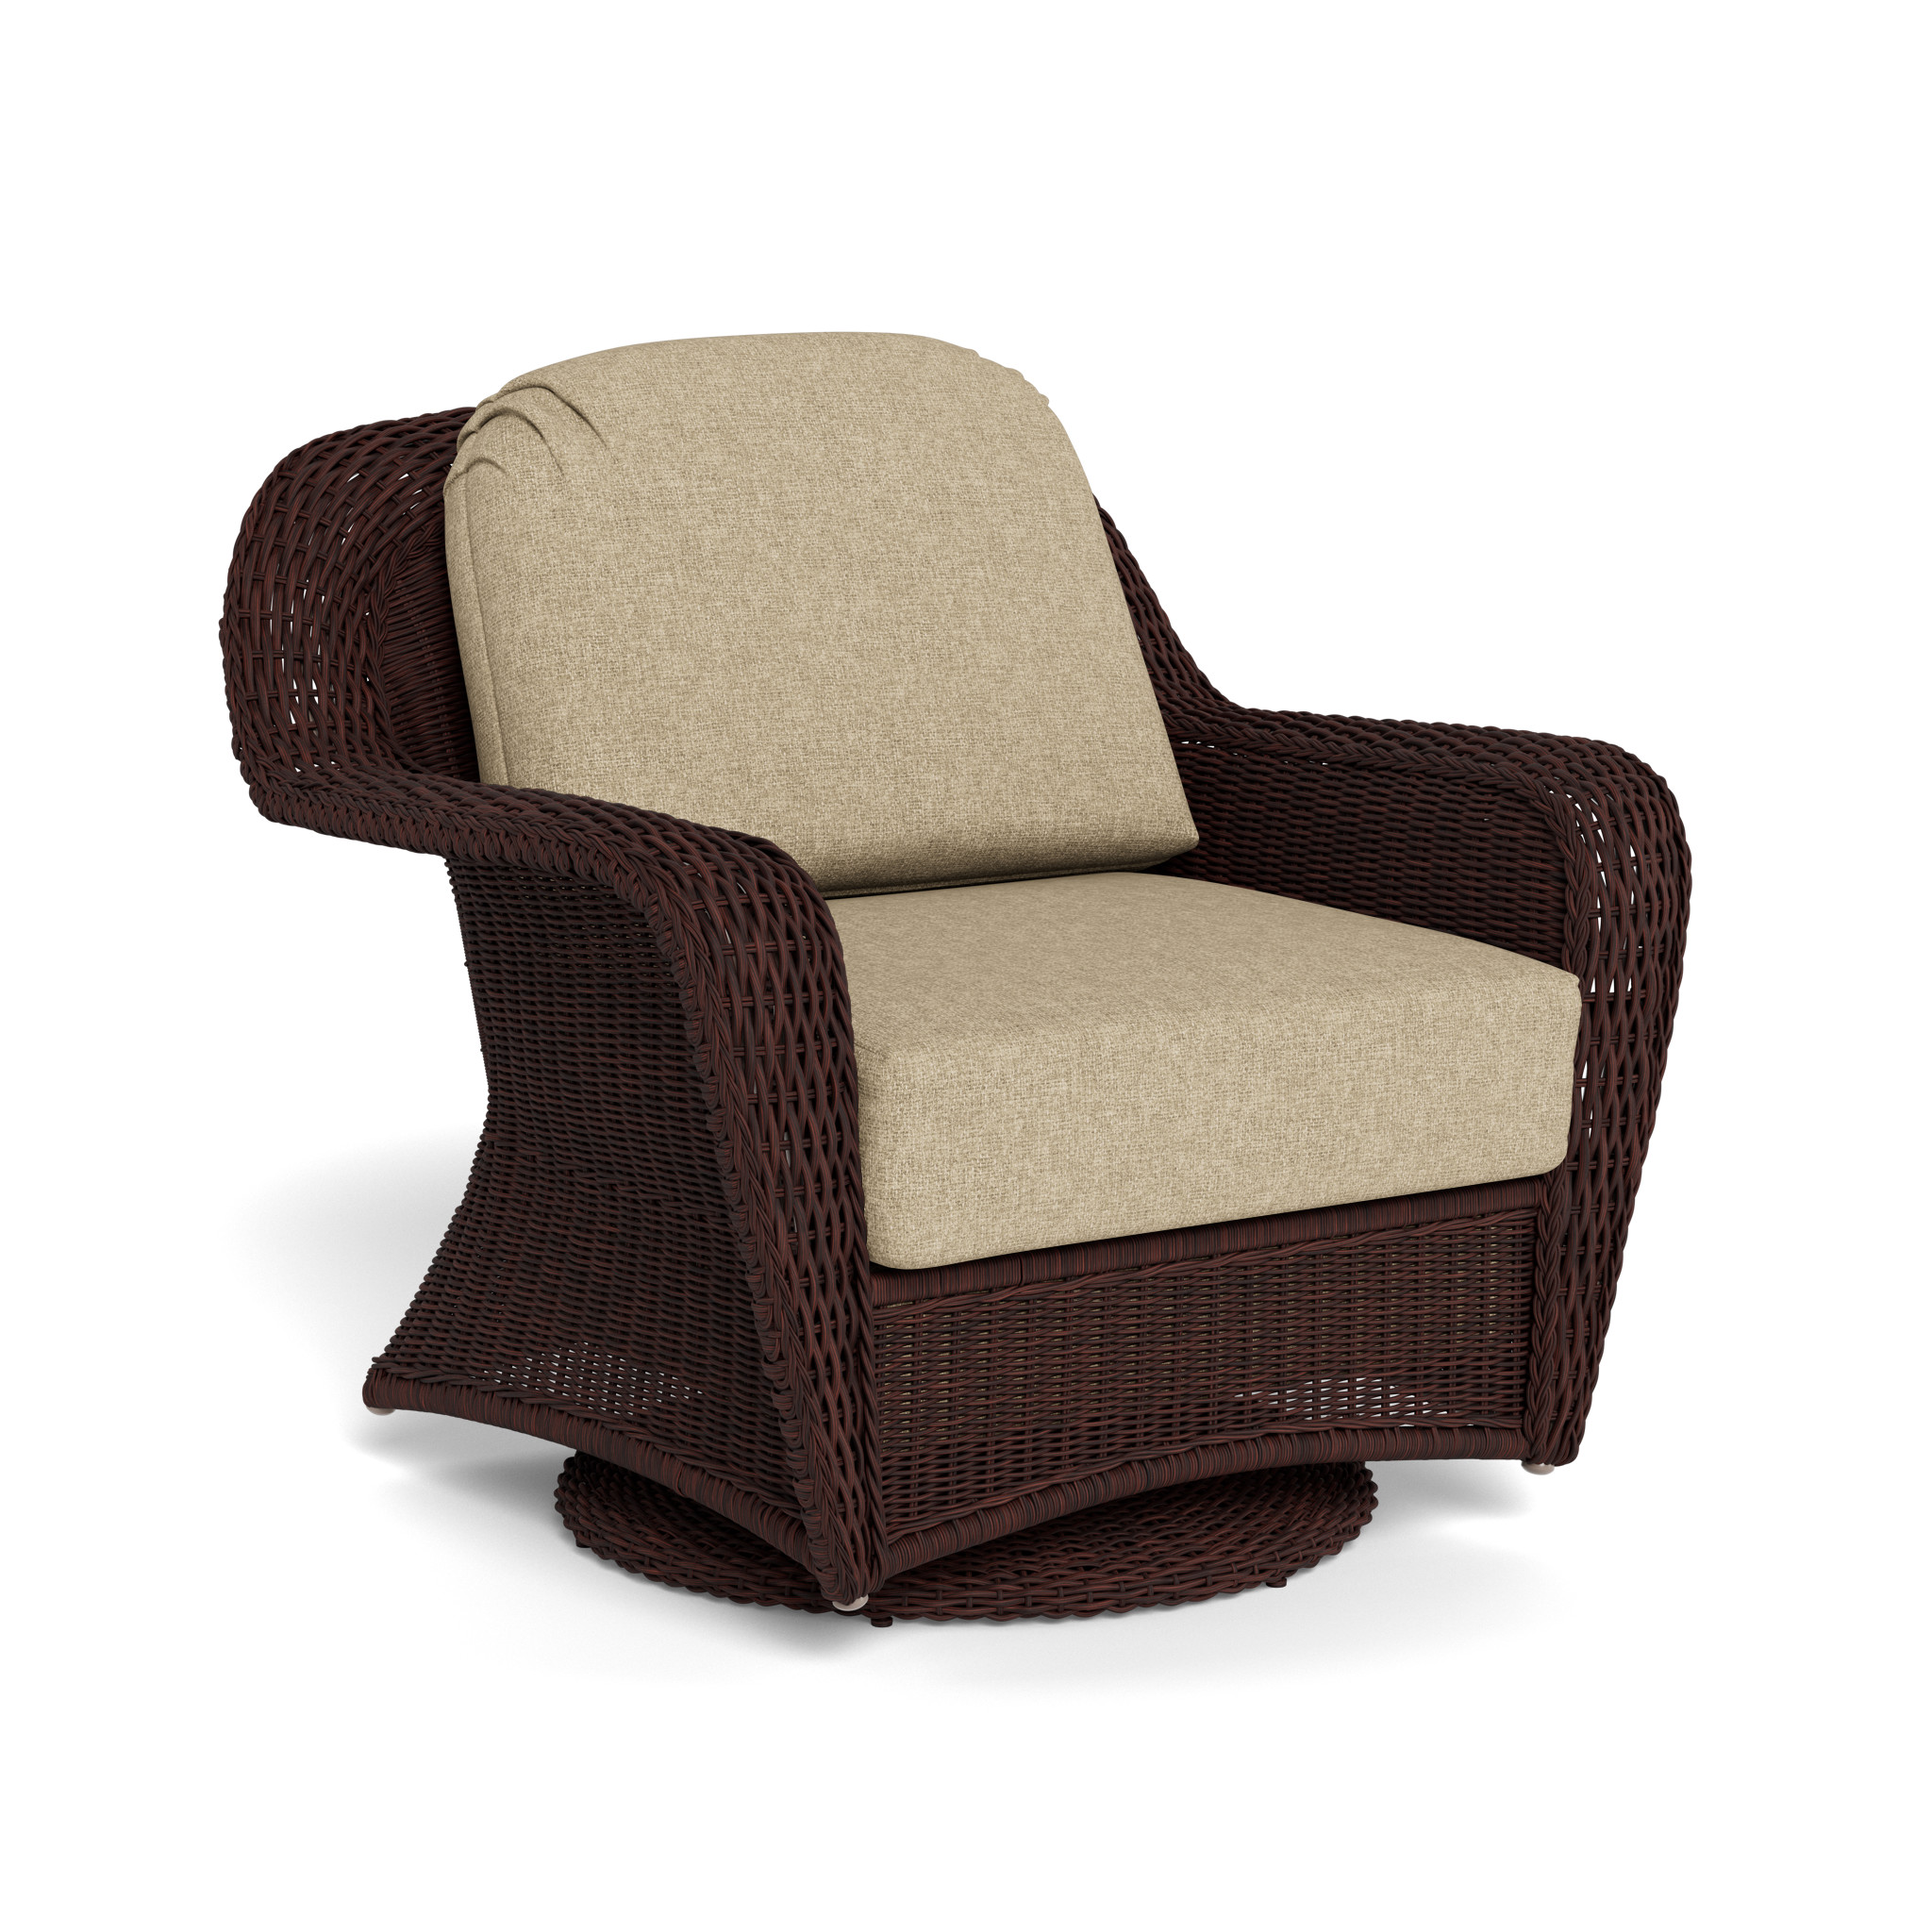 Sea Pines Swivel Glider Club Chair, Java, Canvas Natural - image 1 of 5